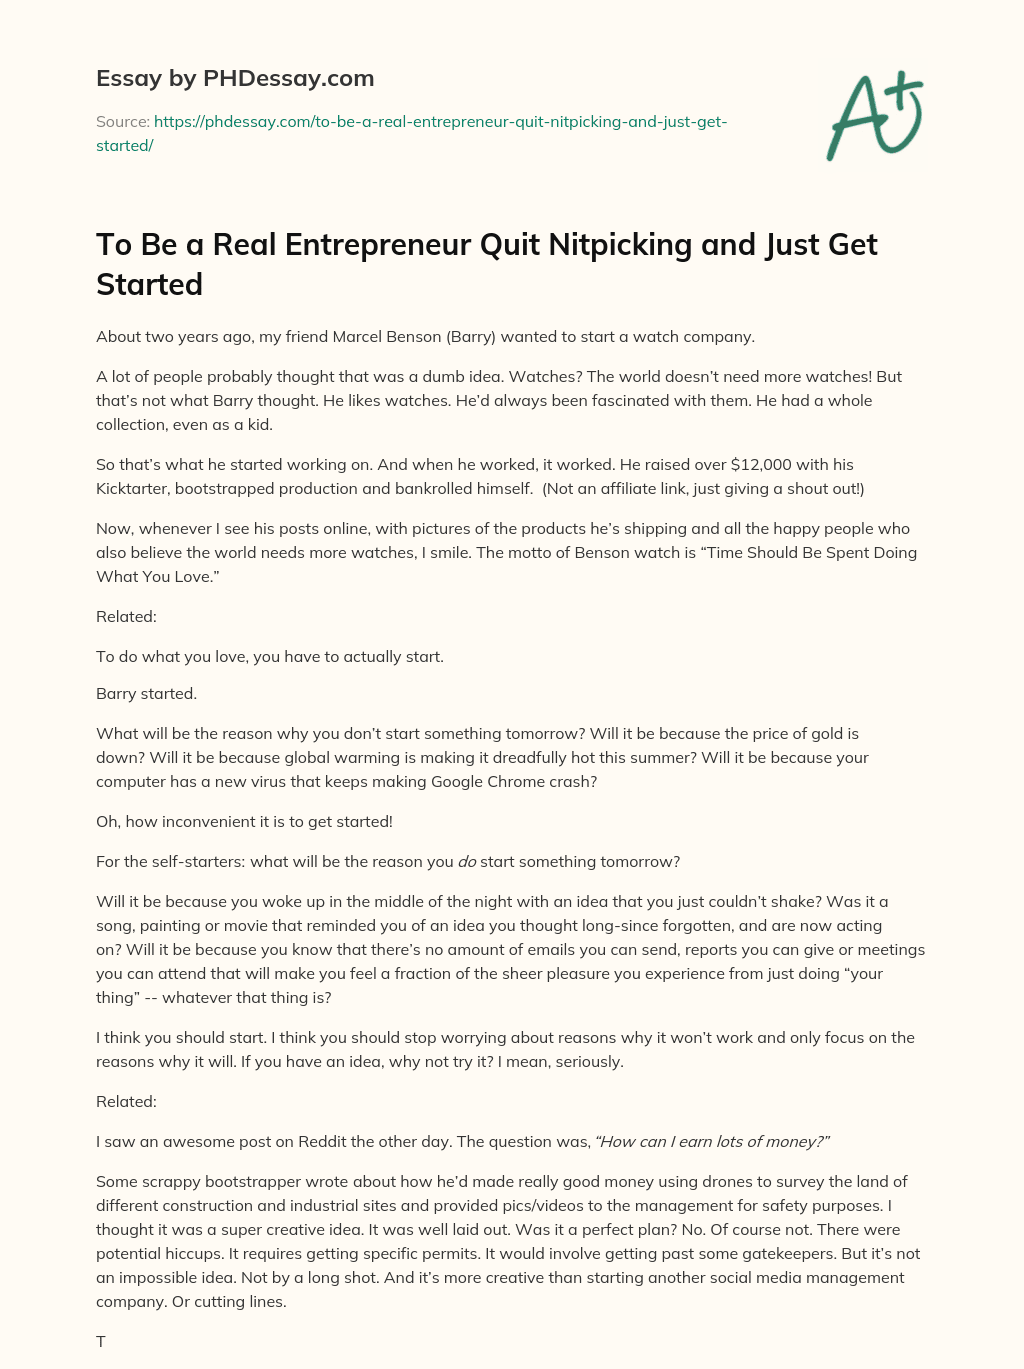 To Be a Real Entrepreneur Quit Nitpicking and Just Get Started essay